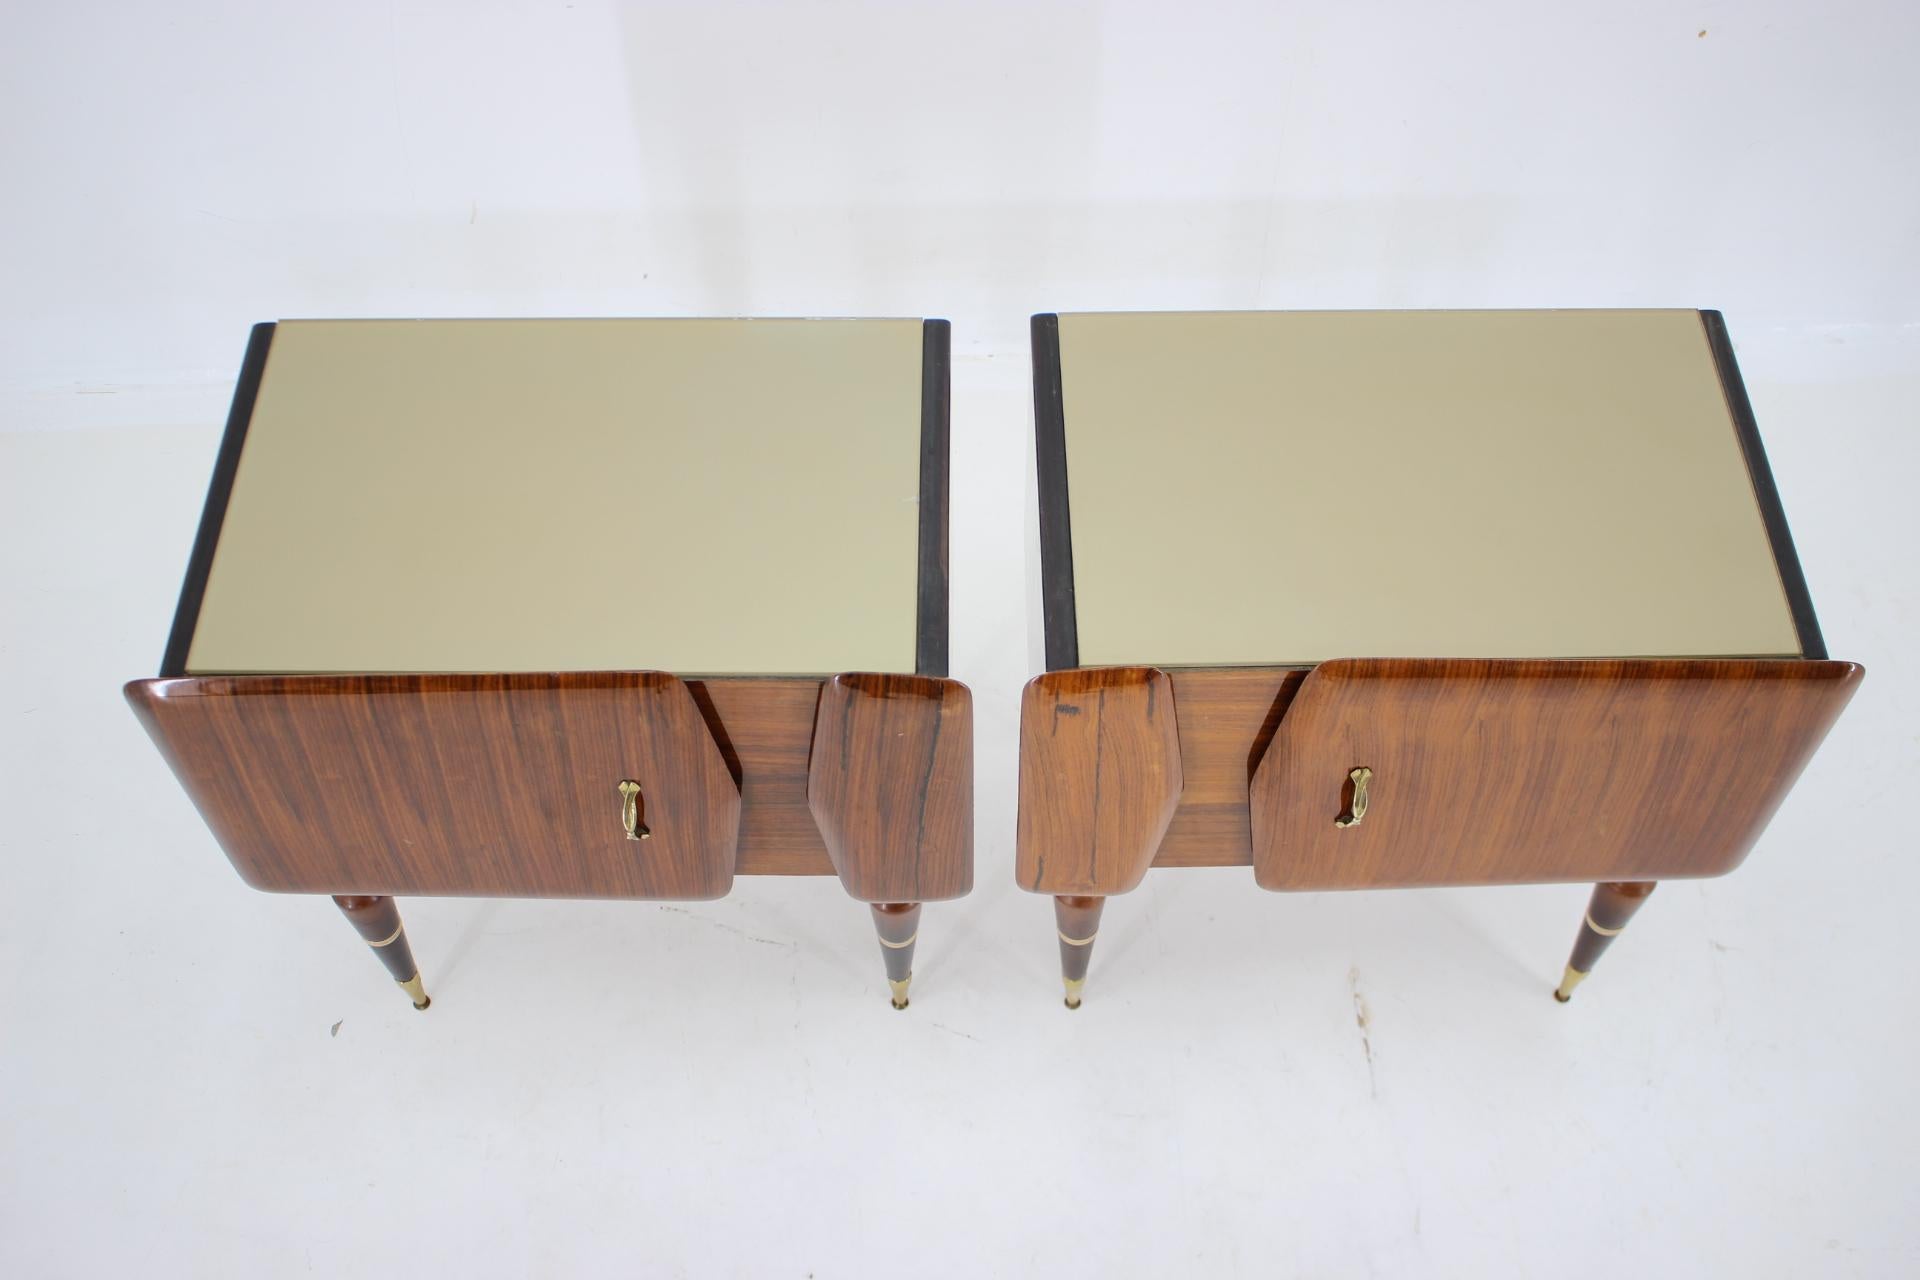 1960s Pair of Sculptural Wooden Bedside Tables, Italy For Sale 5